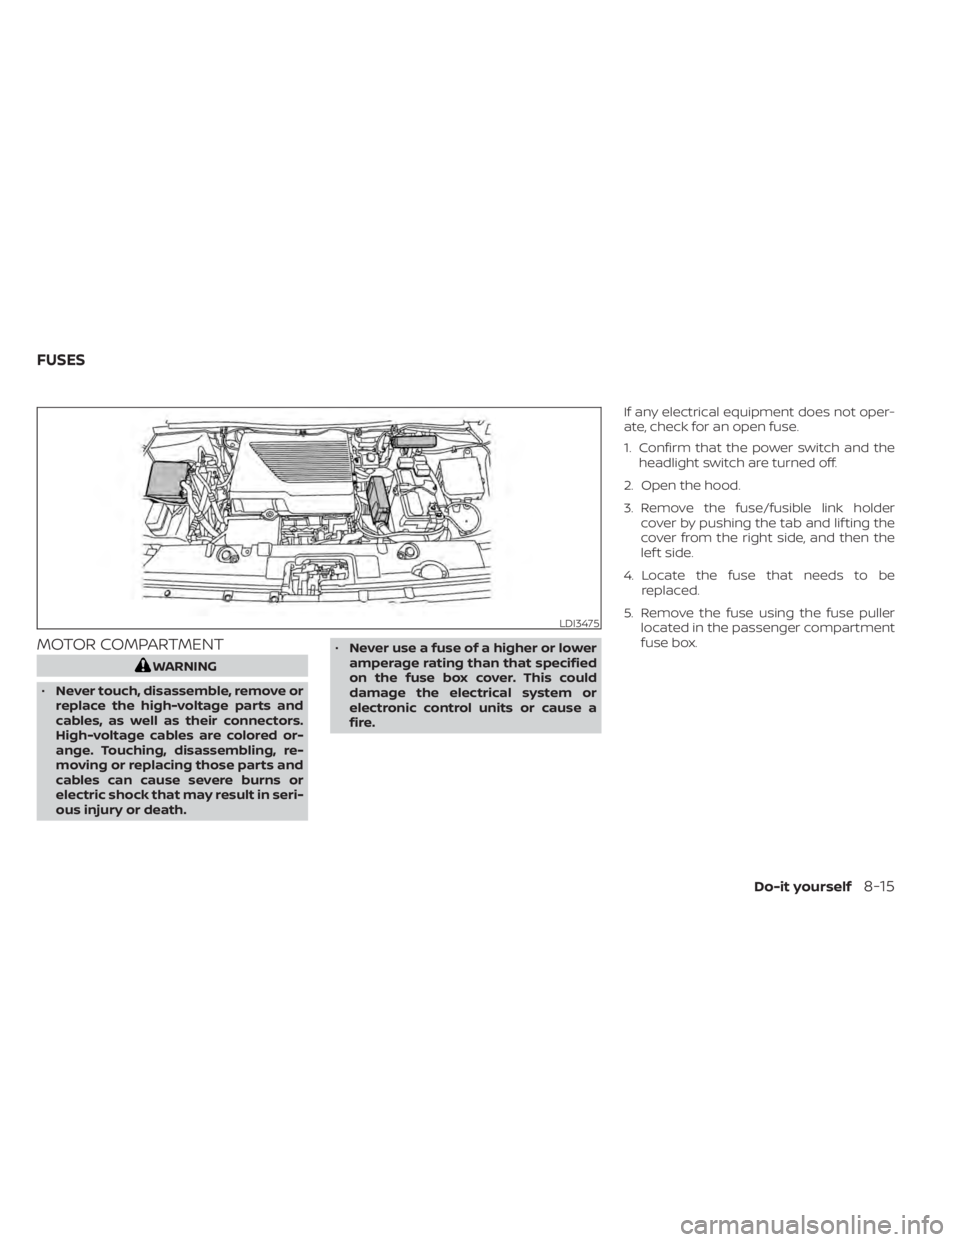 NISSAN LEAF 2021  Owner´s Manual MOTOR COMPARTMENT
WARNING
• Never touch, disassemble, remove or
replace the high-voltage parts and
cables, as well as their connectors.
High-voltage cables are colored or-
ange. Touching, disassembl